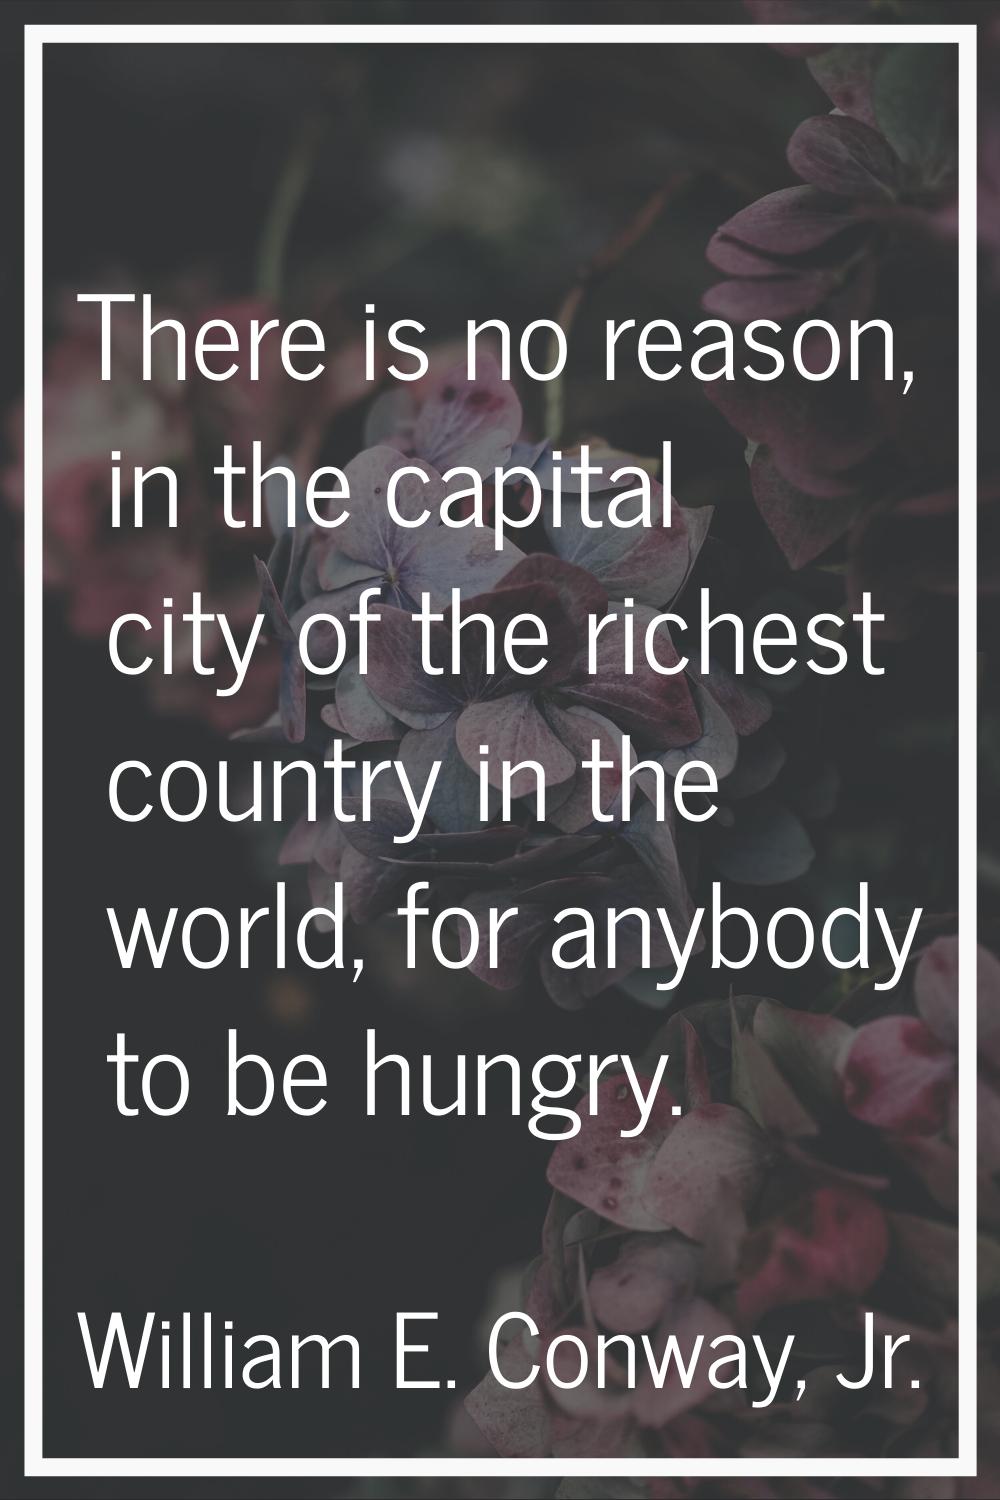 There is no reason, in the capital city of the richest country in the world, for anybody to be hung